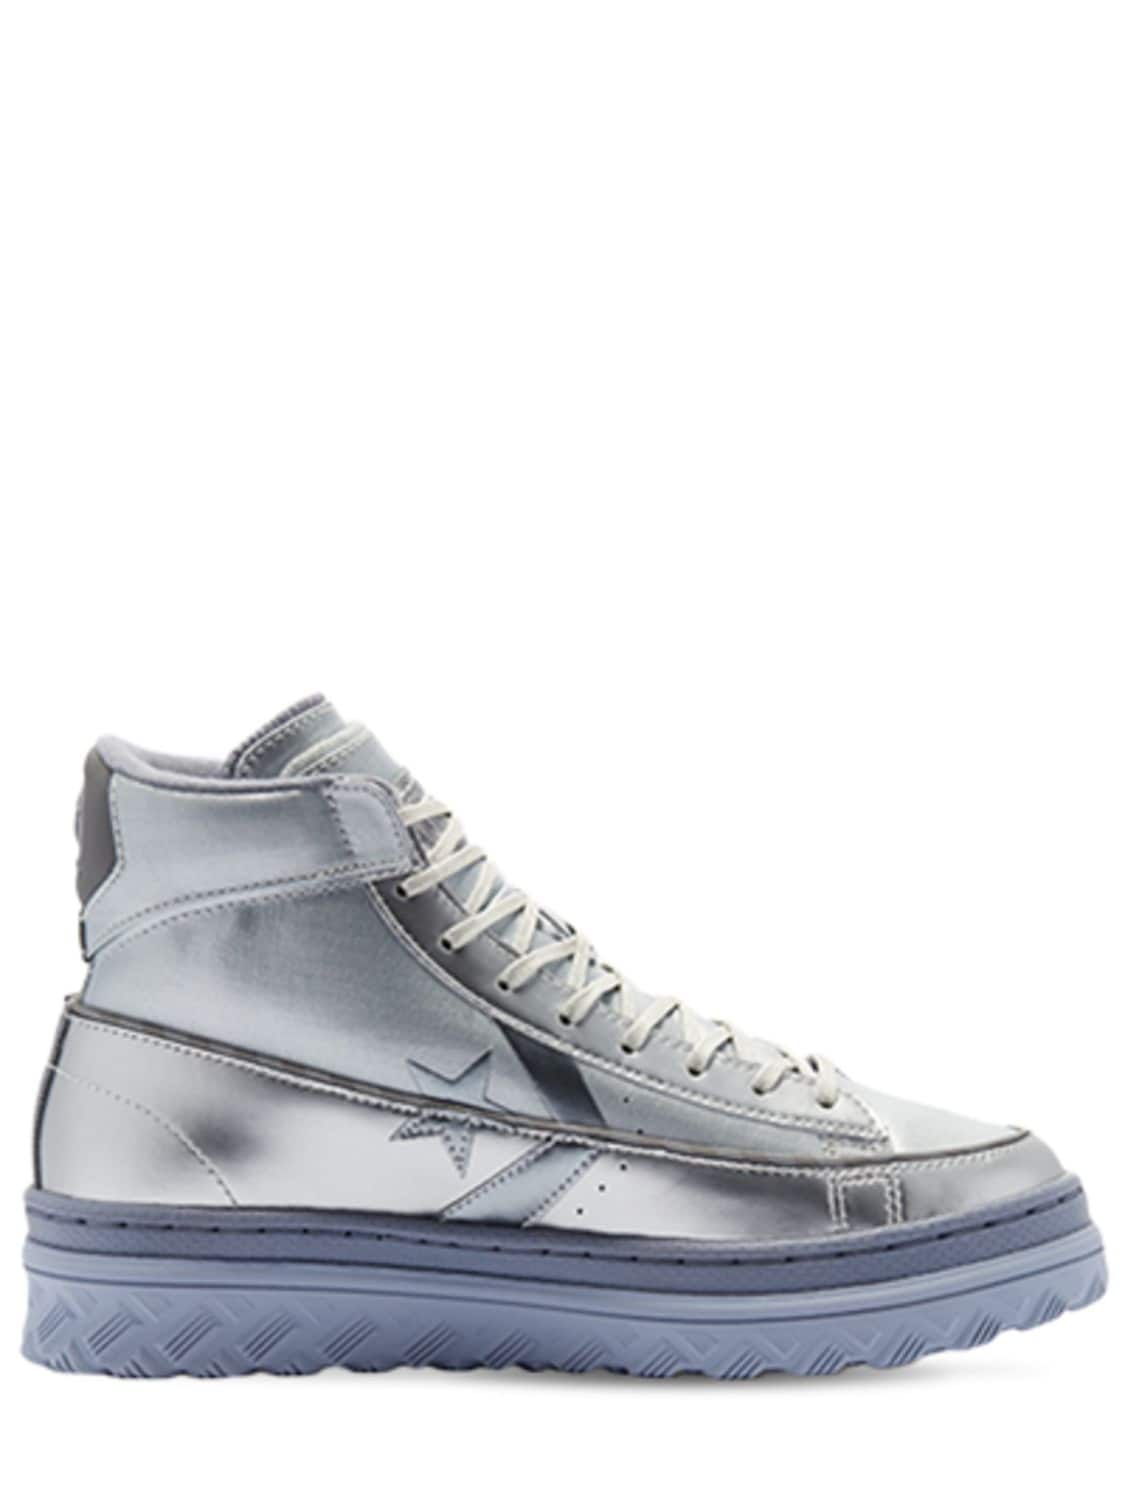 Converse Pro Leather Hacked Sneakers In Silver